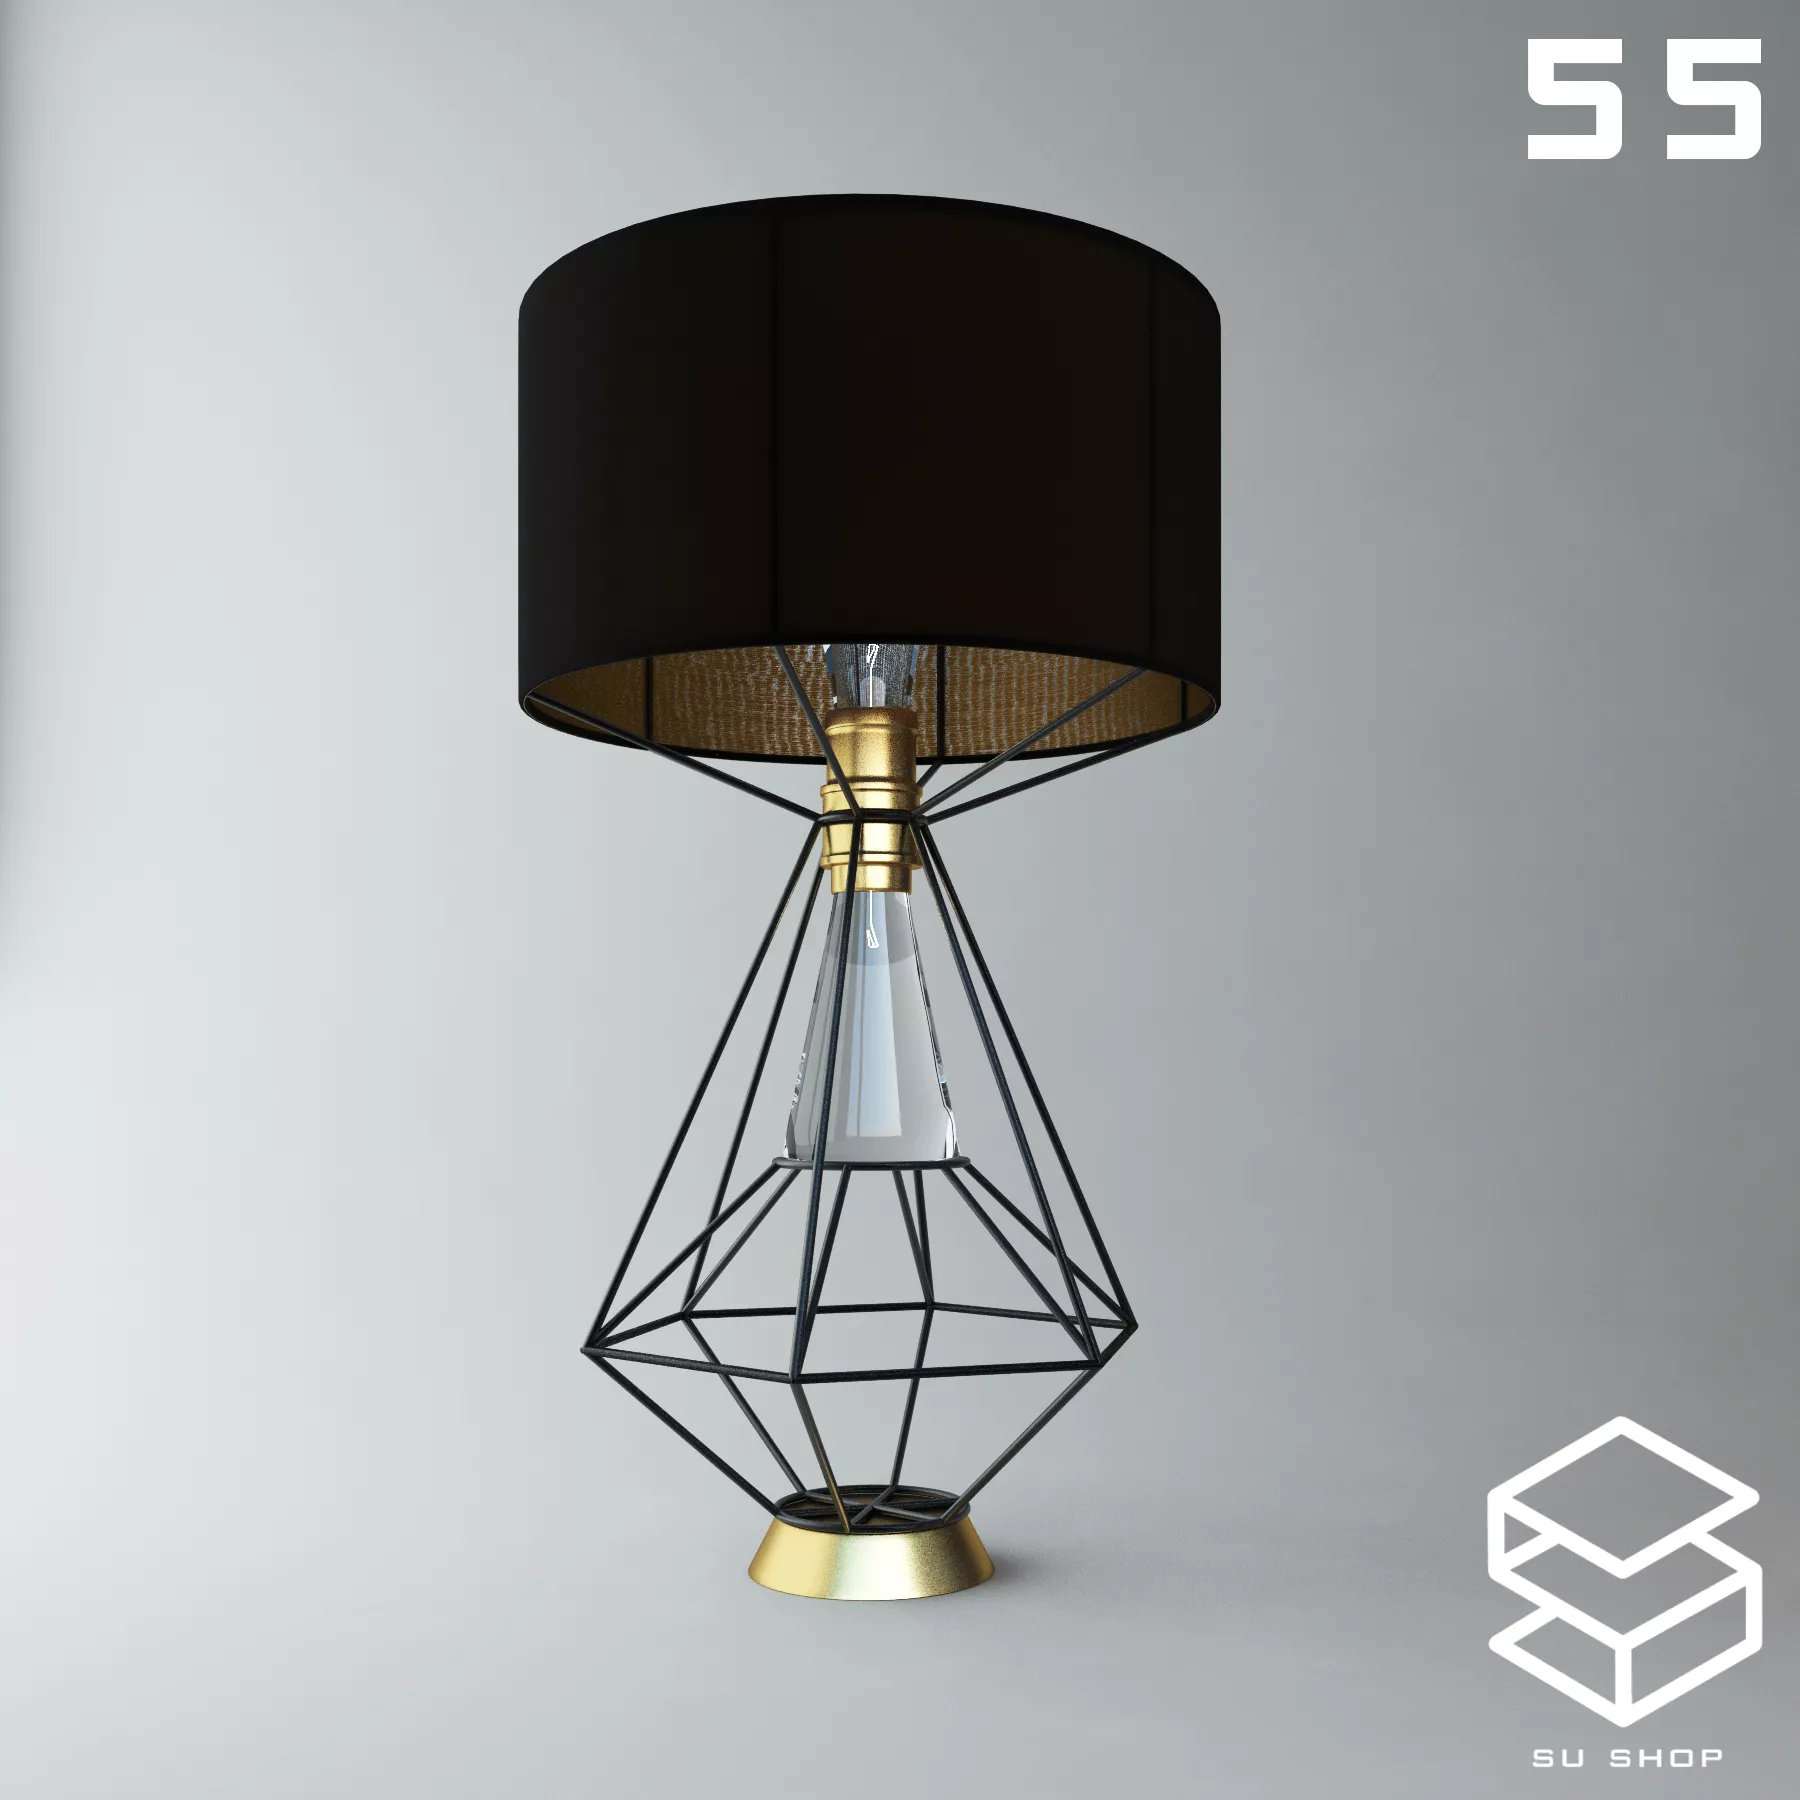 MODERN TABLE LAMP - SKETCHUP 3D MODEL - VRAY OR ENSCAPE - ID14850